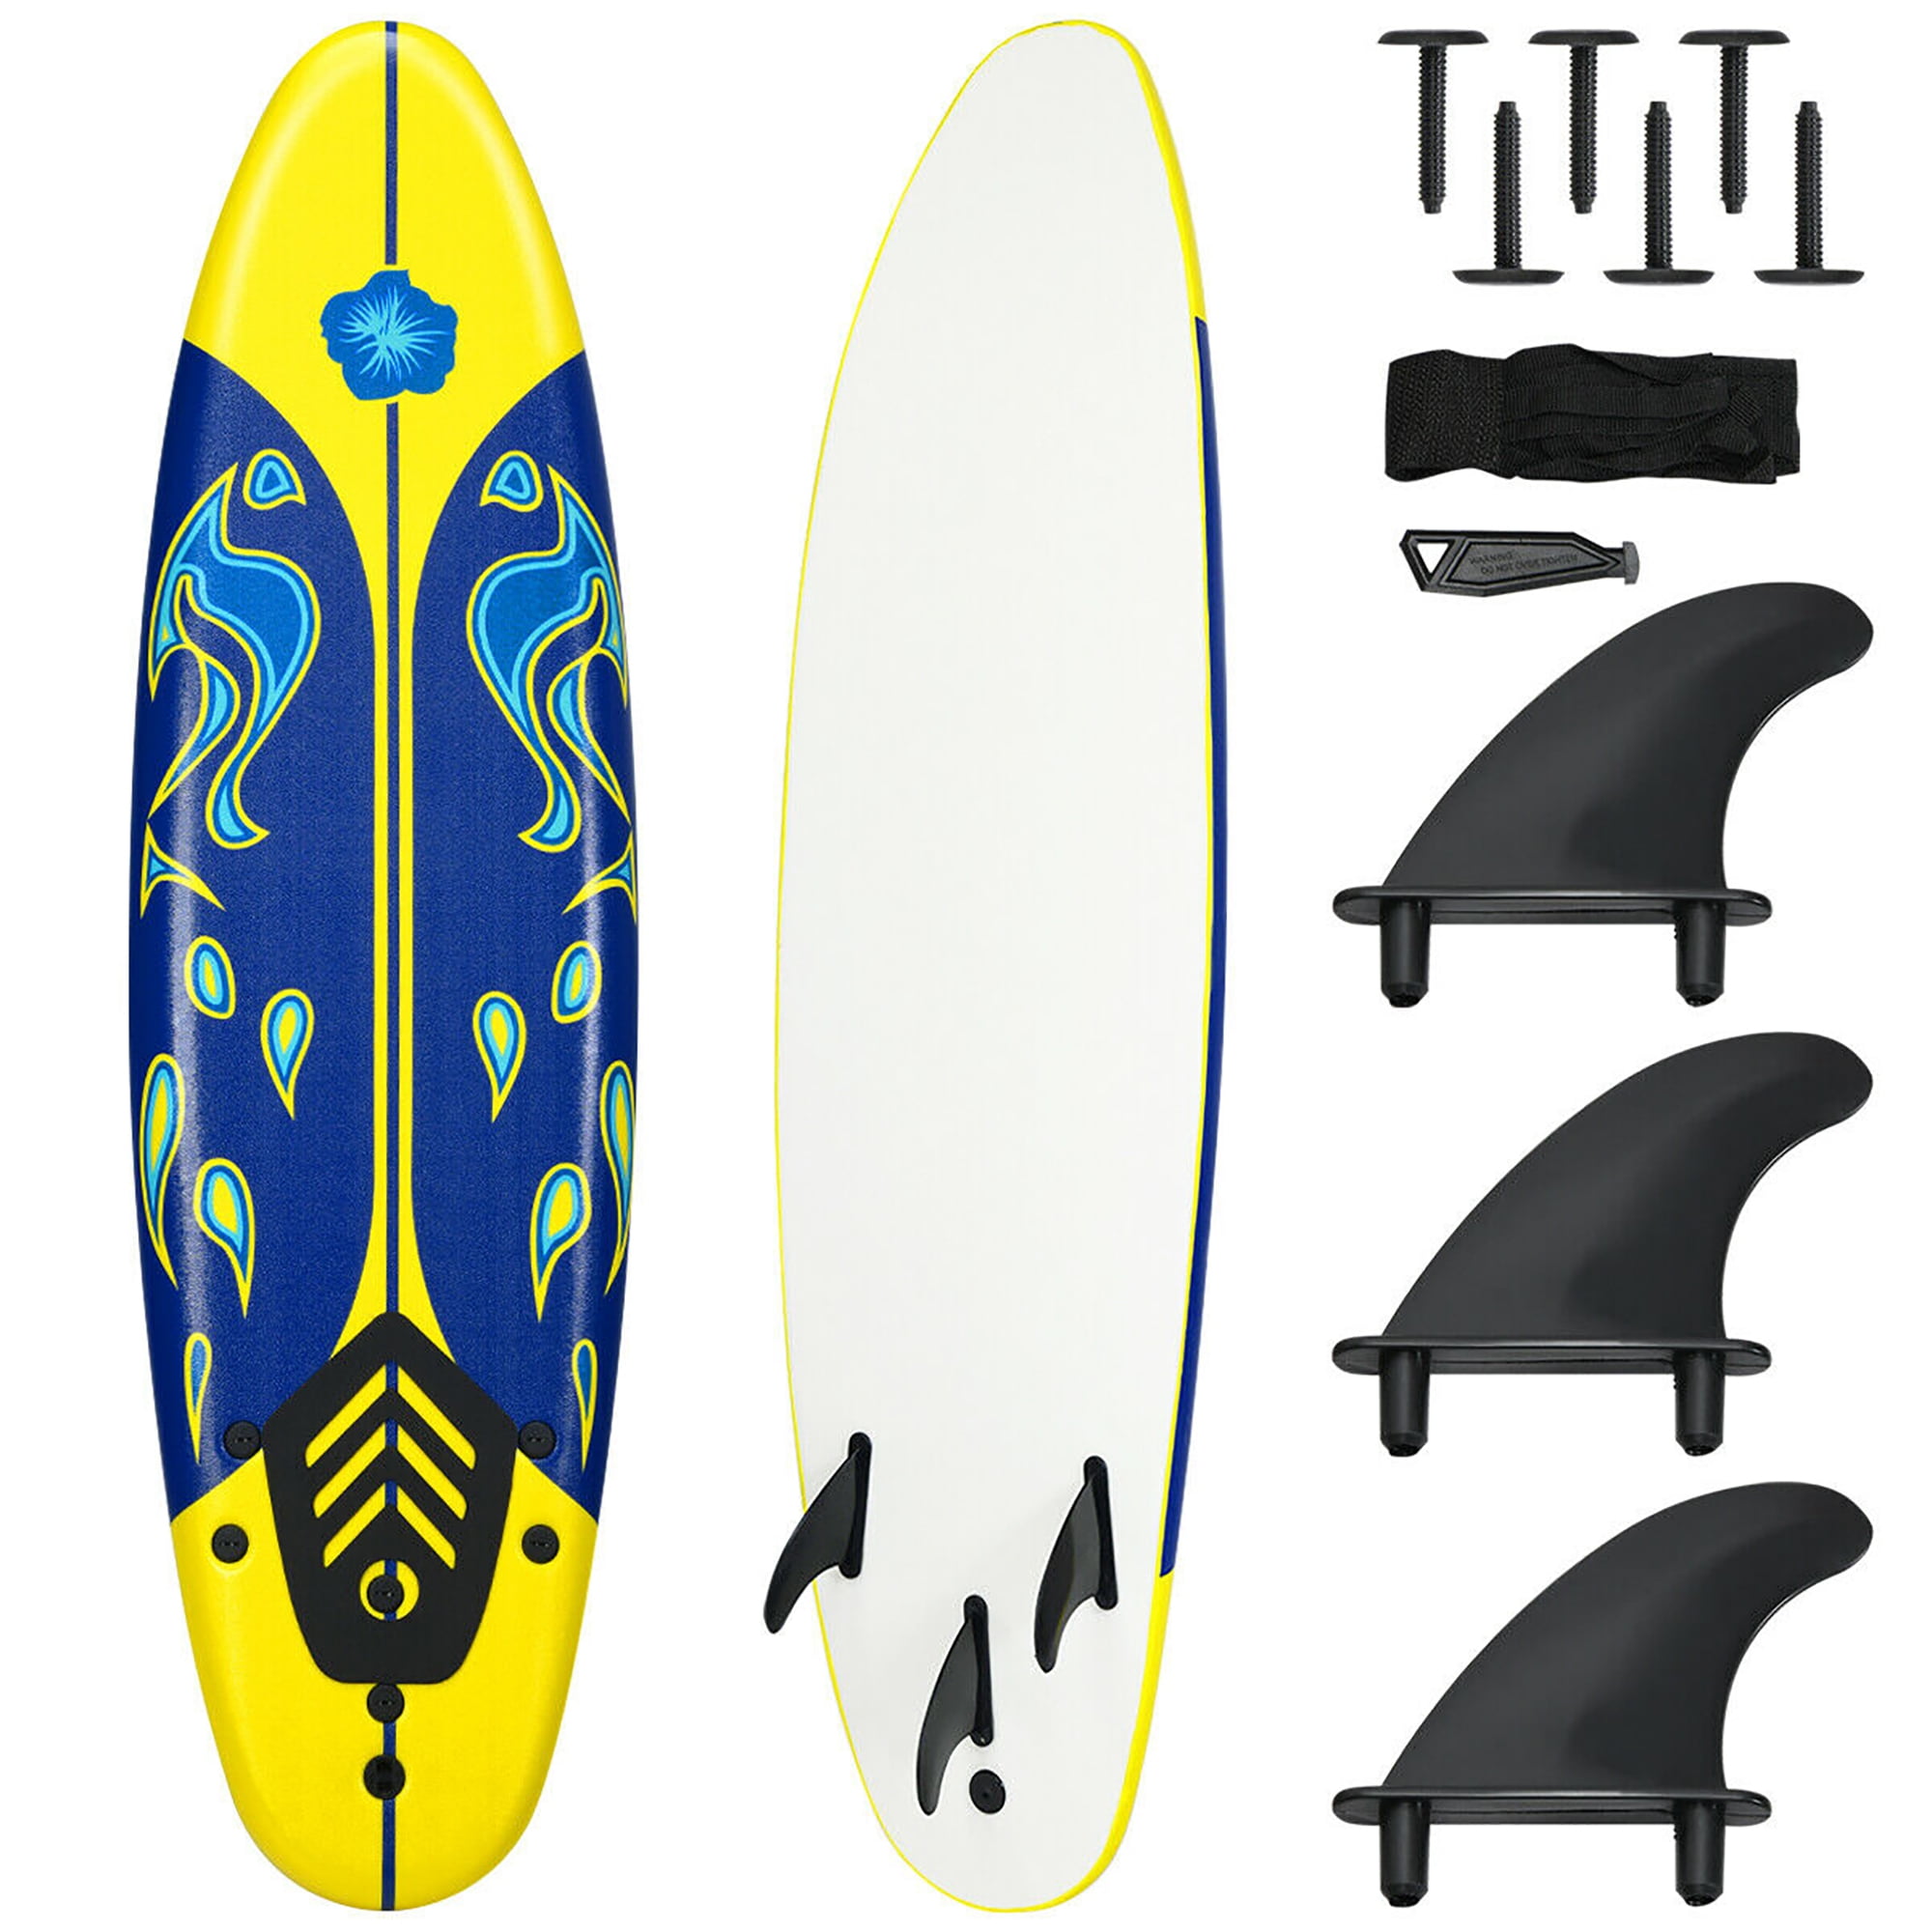 Island Water Sports Classic Softtop Surfboard Foam Wax Free Soft Top Longboard Perfect for Beginner or Advanced/for Adults or Kids 